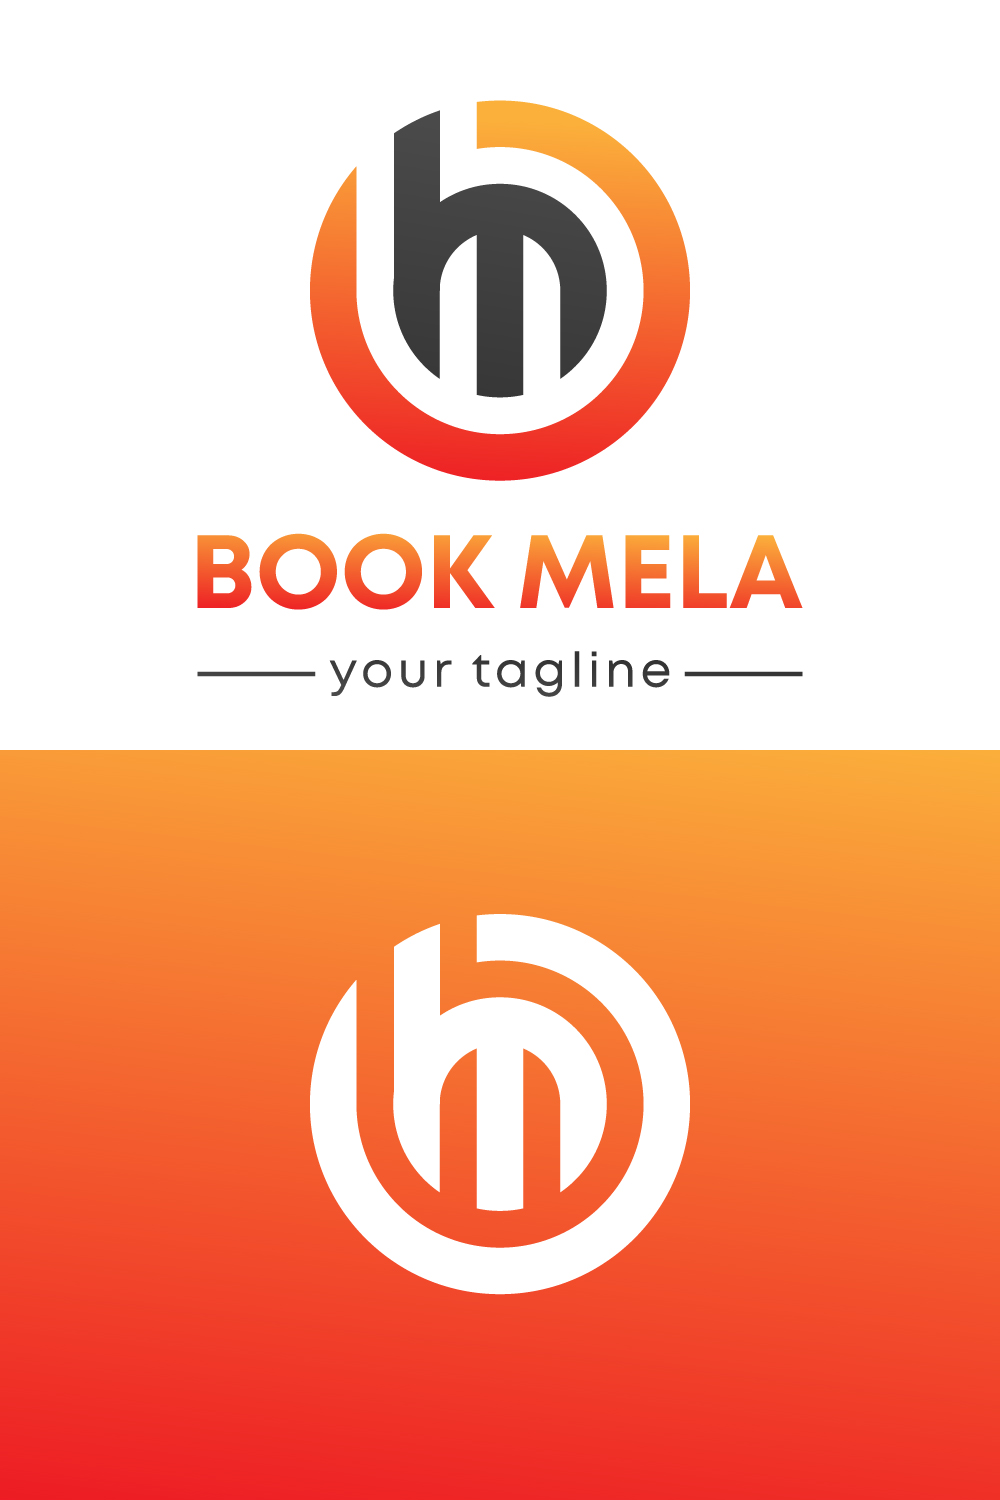 BM Letter Logo Design Graphic by Mahmudul-Hassan · Creative Fabrica